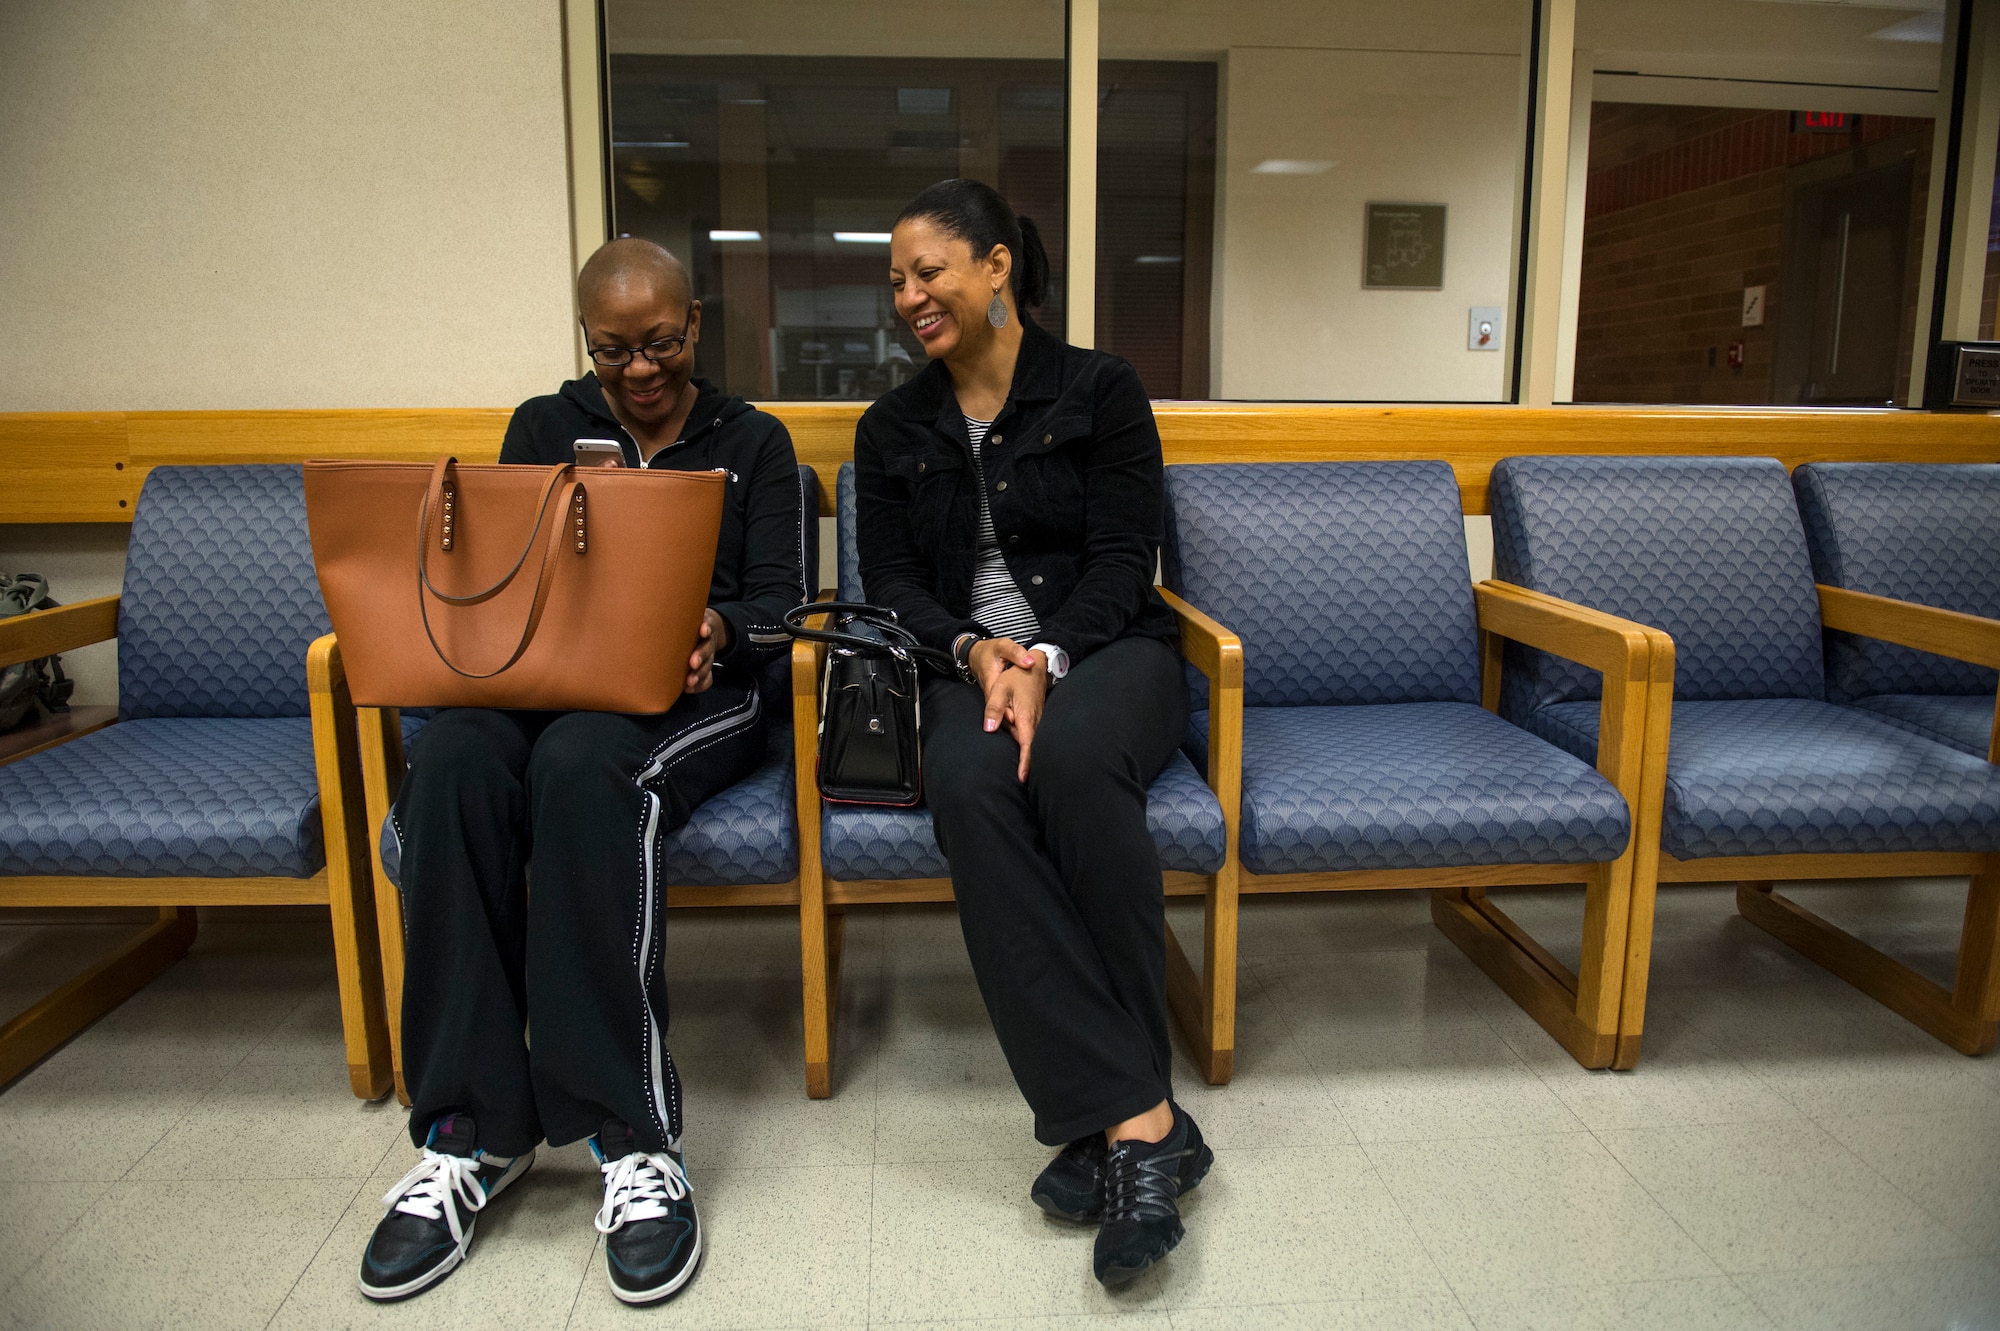 Staff Sgt. Chantel Thibeaux, Joint Base-Fort Sam Houston, Texas, dental assistant instructor, shares a laugh with her mother Carla while watching a video on her phone. As Thibeaux and her mother waited for doctors to perform checks prior to double mastectomy surgery, Carla kept her daughter in good spirits with laughs and loving reminders. (U.S. Air Force photo/Staff Sgt. Vernon Young Jr.)